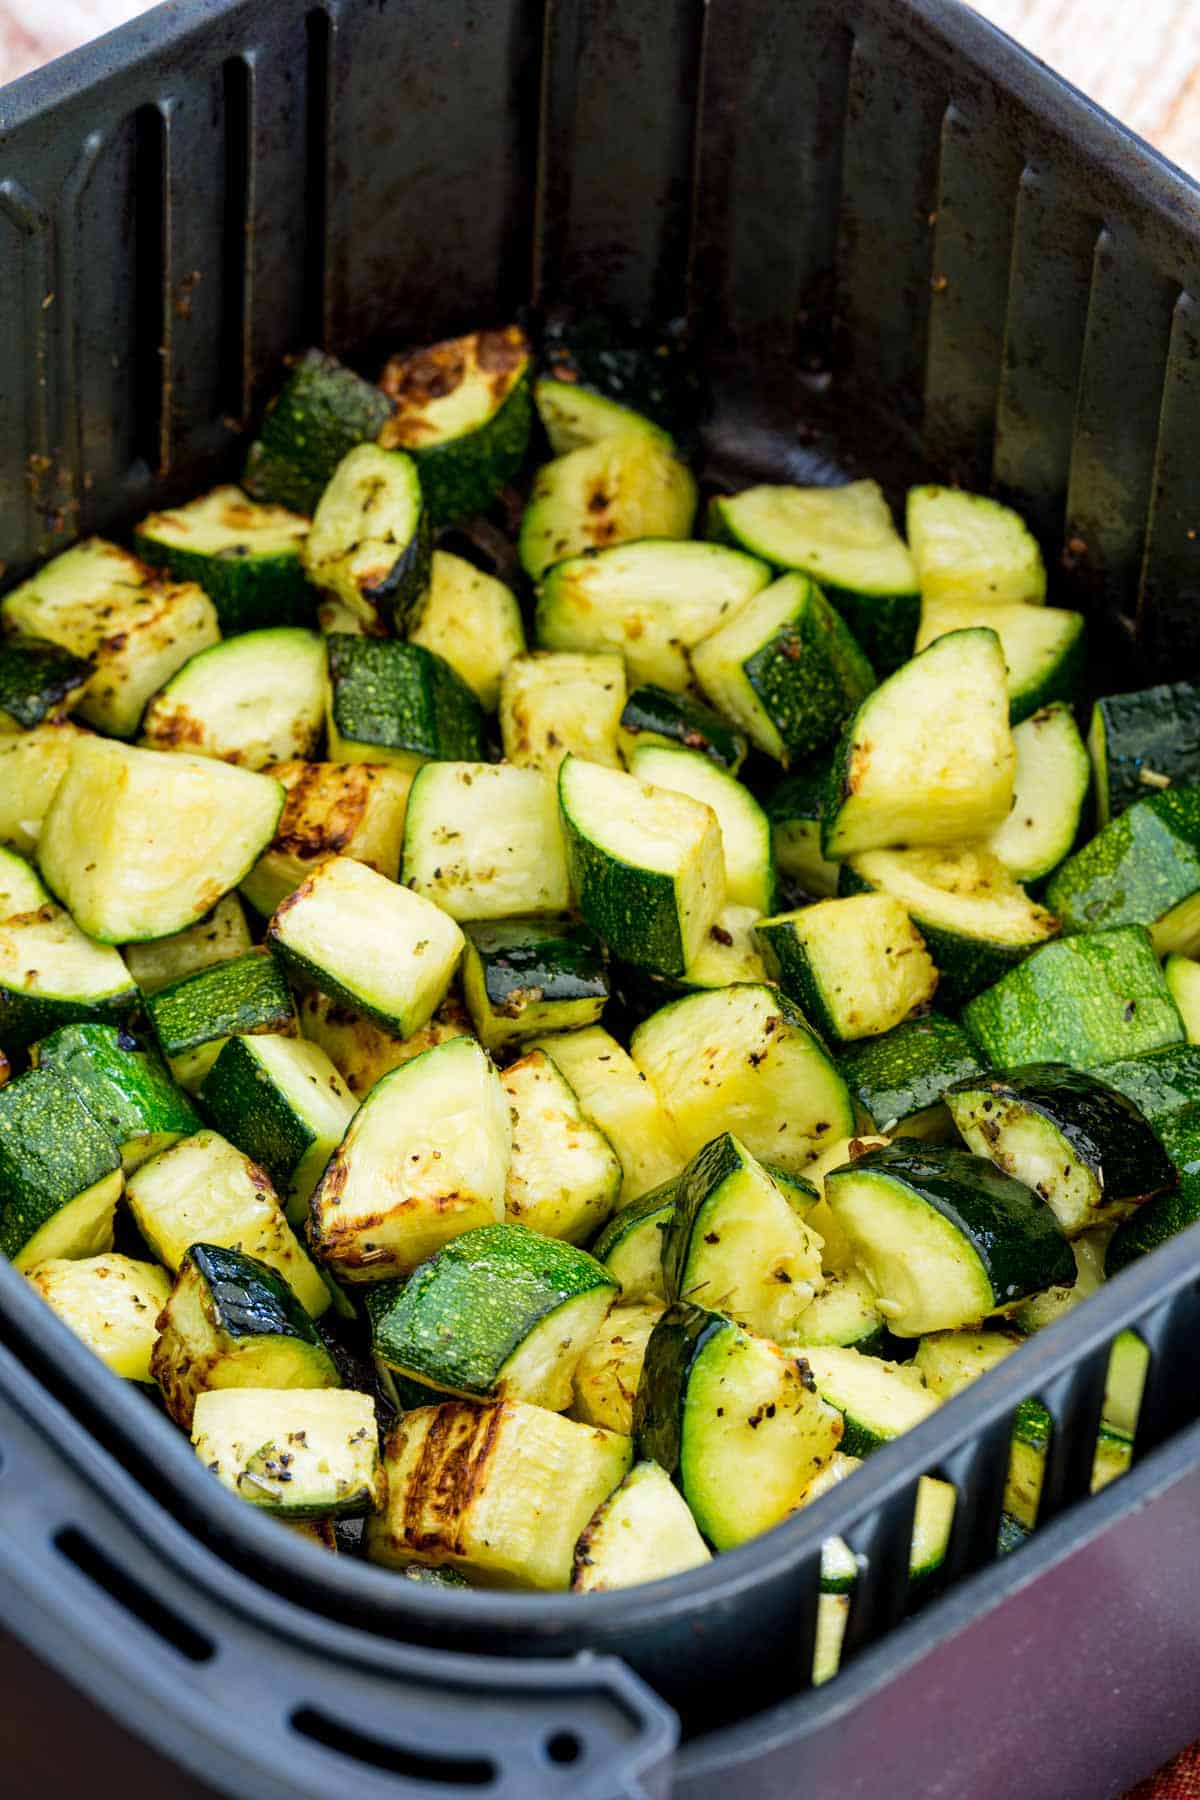 Roasted zucchini pieces inside the air fryer.